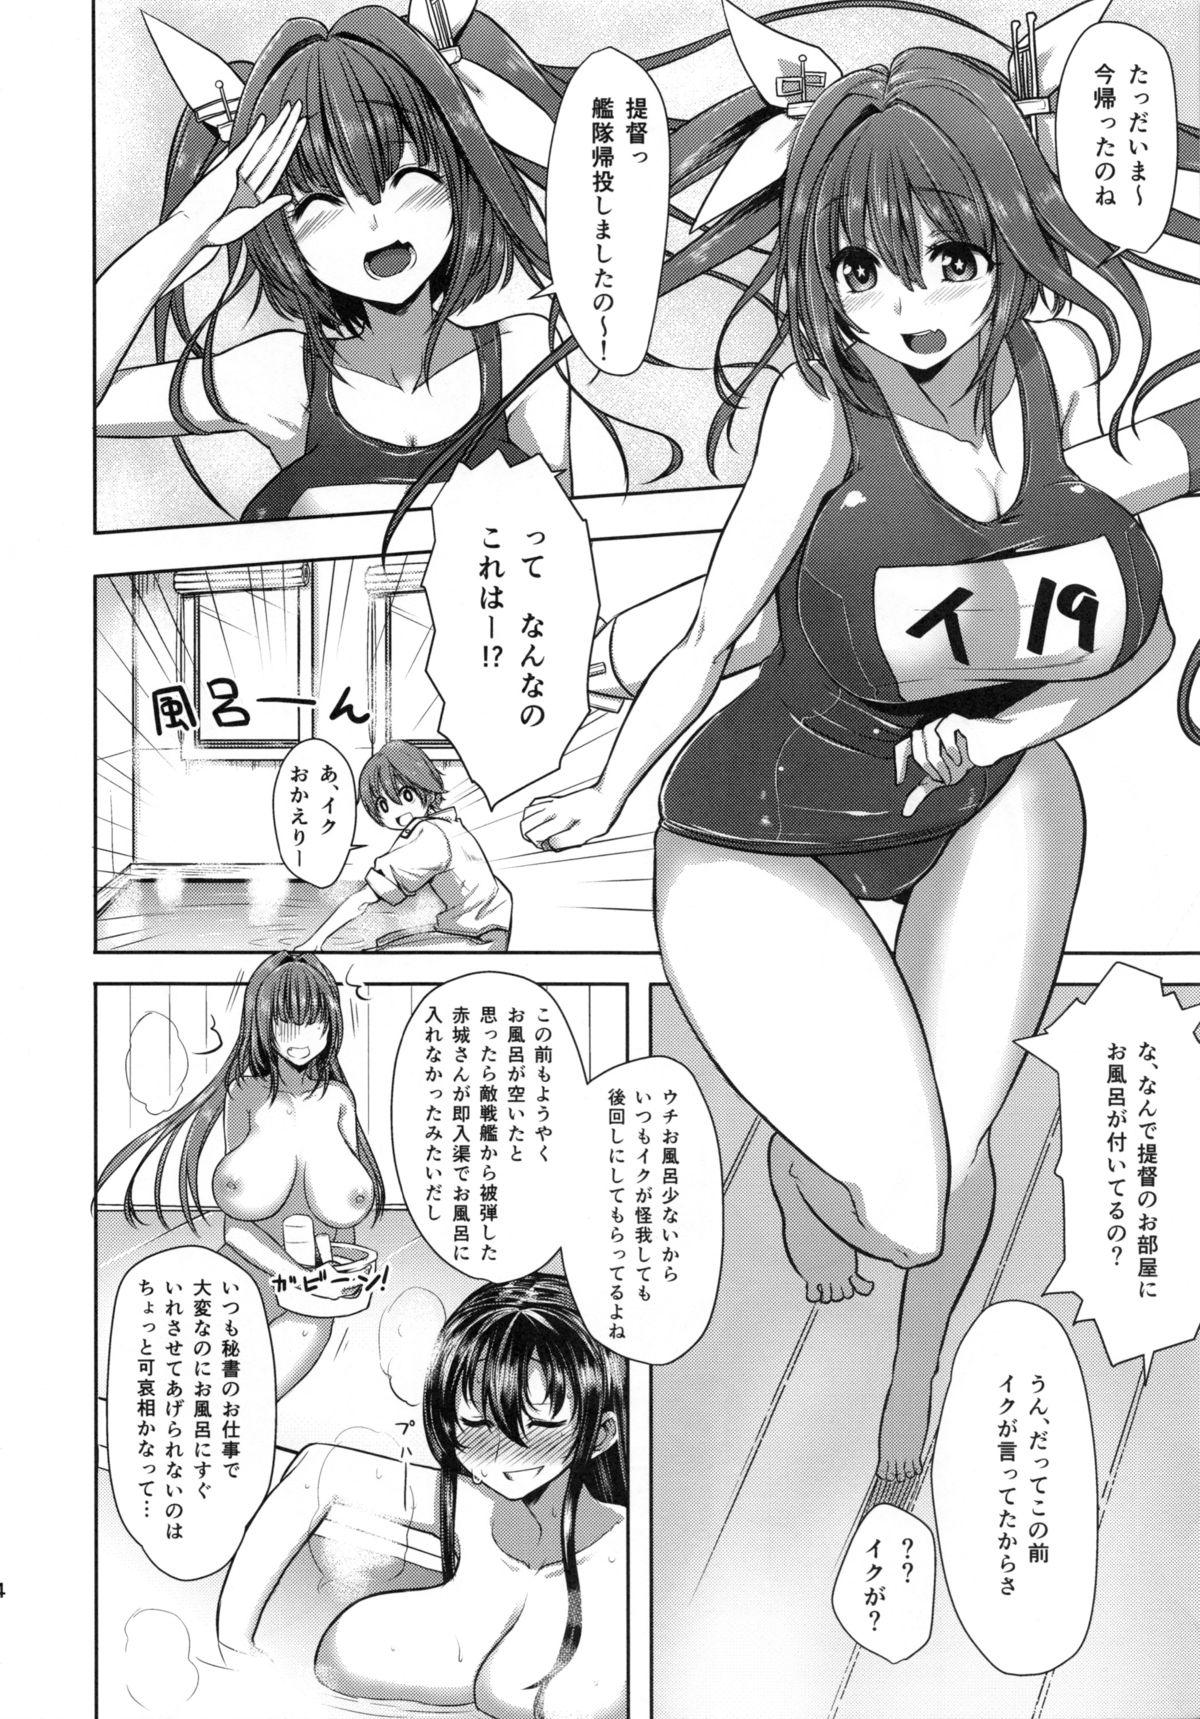 Bigcocks I-19 to Icchau?? - Kantai collection Casal - Page 3